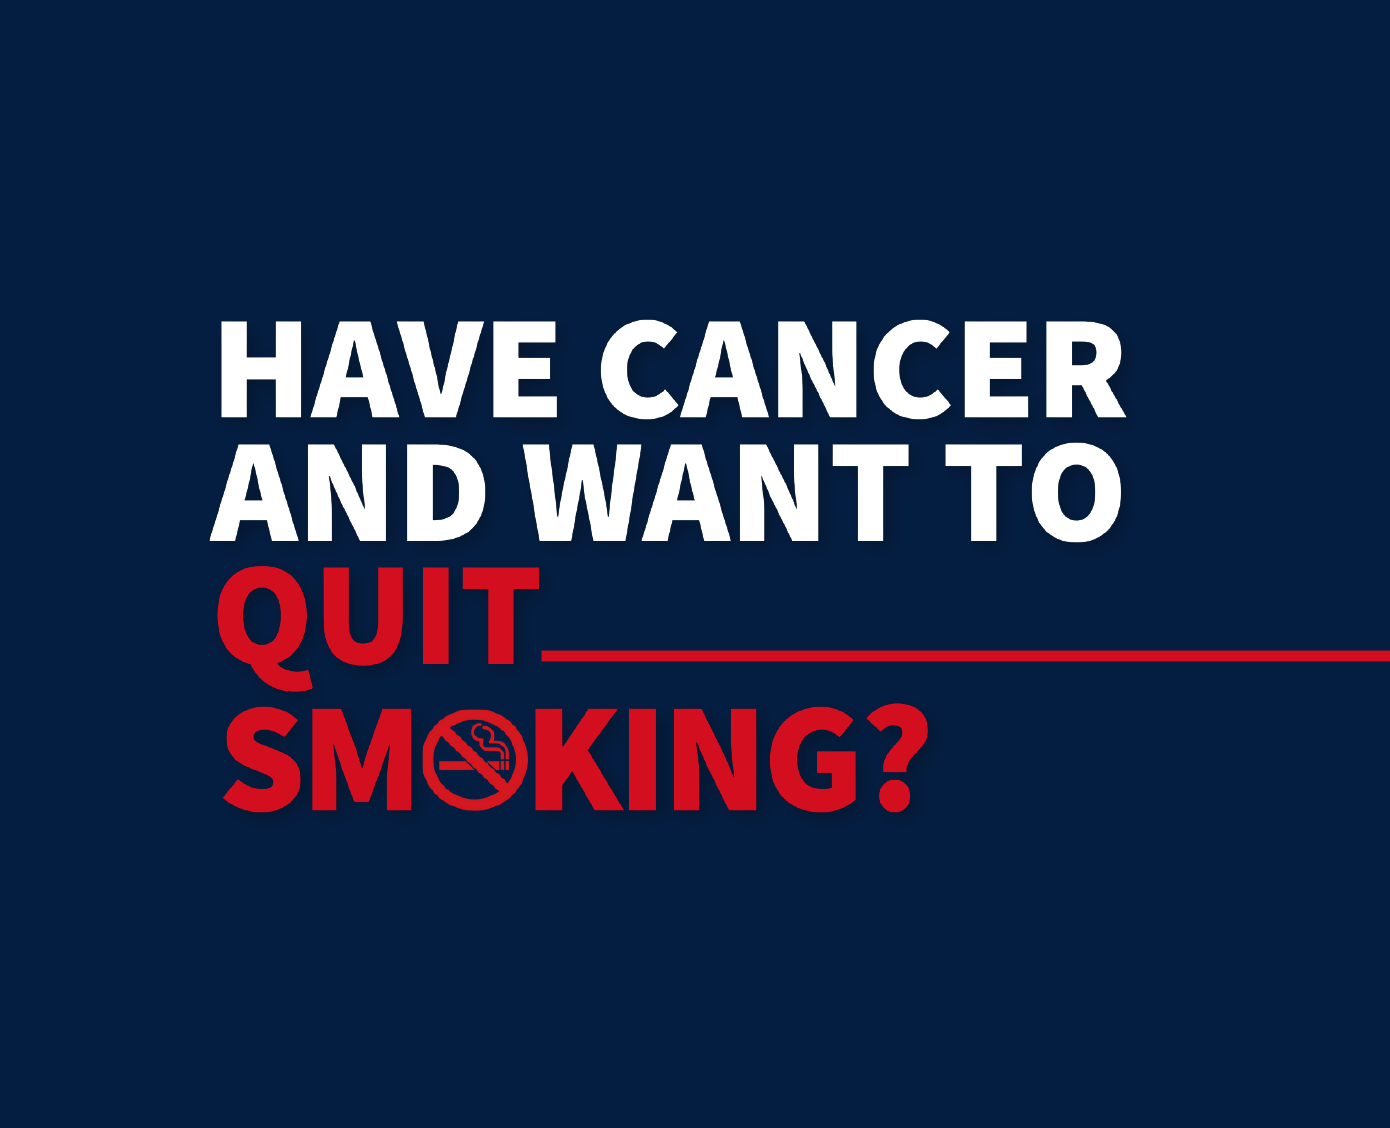 Have Cancer and Want to Quit Smoking?